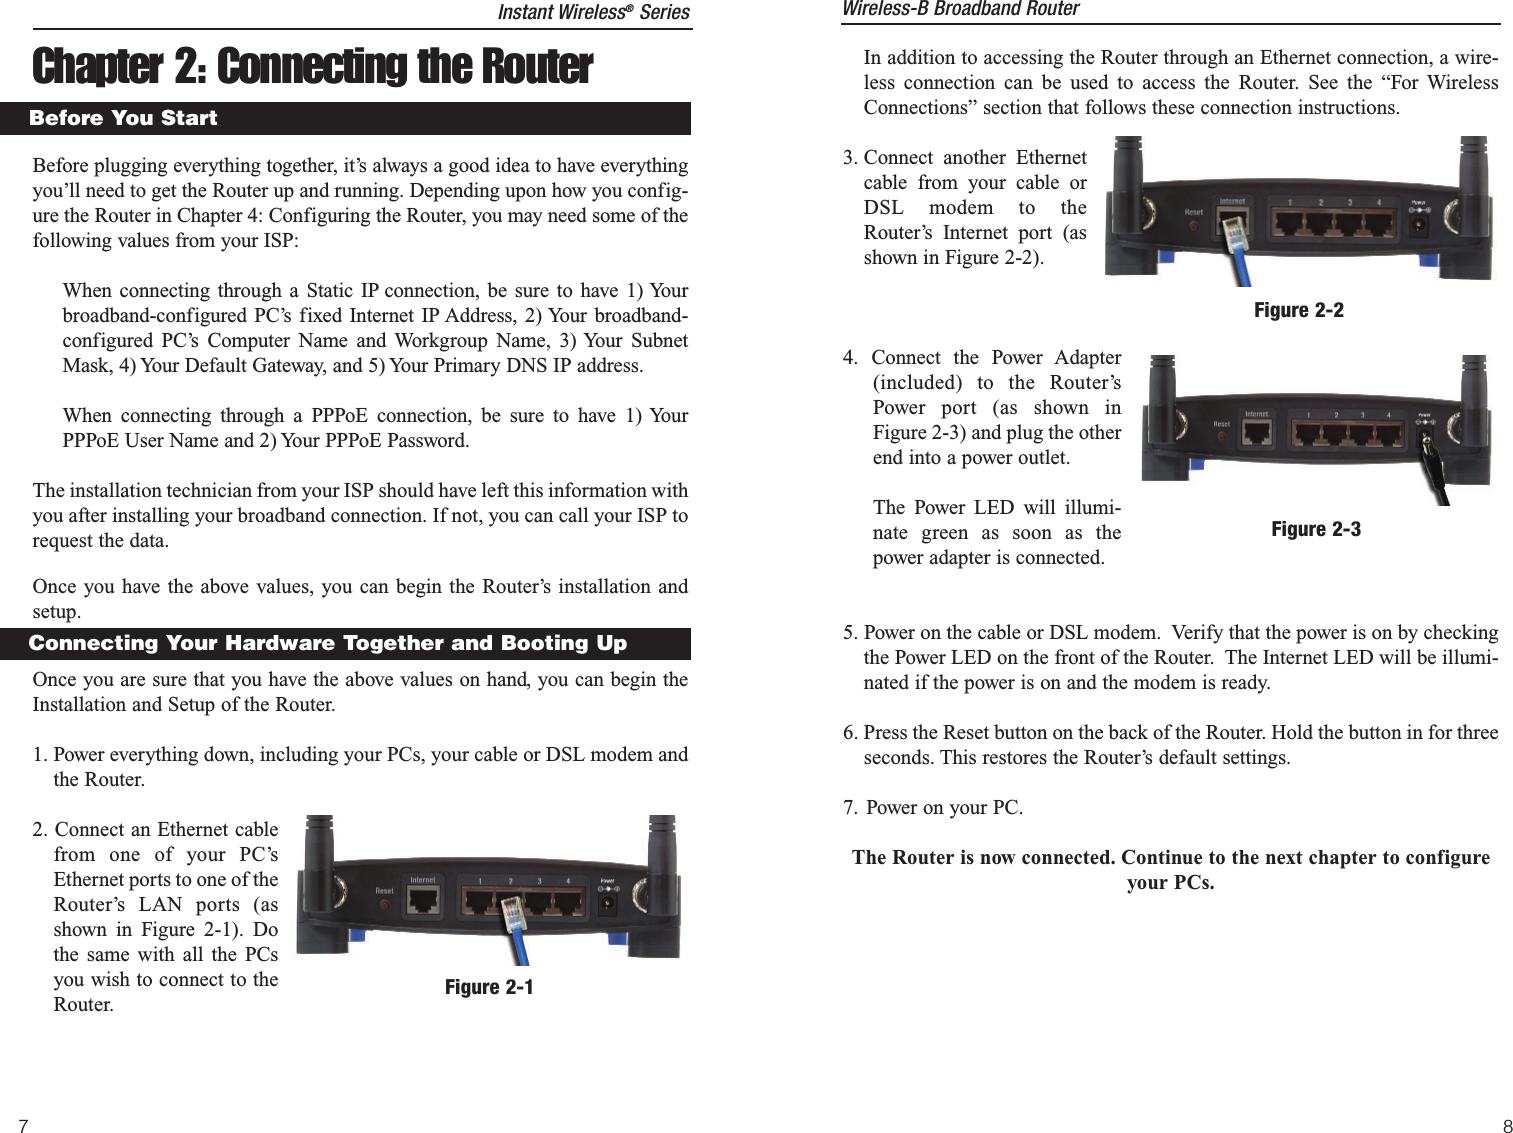 In addition to accessing the Router through an Ethernet connection, a wire-less connection can be used to access the Router. See the “For WirelessConnections” section that follows these connection instructions.3. Connect another Ethernetcable from your cable orDSL modem to theRouter’s Internet port (asshown in Figure 2-2).4. Connect the Power Adapter(included) to the Router’sPower port (as shown inFigure 2-3) and plug the otherend into a power outlet.The Power LED will illumi-nate green as soon as thepower adapter is connected.5. Power on the cable or DSL modem.  Verify that the power is on by checkingthe Power LED on the front of the Router.  The Internet LED will be illumi-nated if the power is on and the modem is ready.6. Press the Reset button on the back of the Router. Hold the button in for threeseconds. This restores the Router’s default settings.7. Power on your PC.The Router is now connected. Continue to the next chapter to configureyour PCs.Figure 2-2Figure 2-3Wireless-B Broadband Router7Chapter 2: Connecting the RouterBefore plugging everything together, it’s always a good idea to have everythingyou’ll need to get the Router up and running. Depending upon how you config-ure the Router in Chapter 4: Configuring the Router, you may need some of thefollowing values from your ISP:When connecting through a Static IP connection, be sure to have 1) Yourbroadband-configured PC’s fixed Internet IP Address, 2) Your broadband-configured PC’s Computer Name and Workgroup Name, 3) Your SubnetMask, 4) Your Default Gateway, and 5) Your Primary DNS IP address.When connecting through a PPPoE connection, be sure to have 1) YourPPPoE User Name and 2) Your PPPoE Password.The installation technician from your ISP should have left this information withyou after installing your broadband connection. If not, you can call your ISP torequest the data.Once you have the above values, you can begin the Router’s installation andsetup.Once you are sure that you have the above values on hand, you can begin theInstallation and Setup of the Router.1. Power everything down, including your PCs, your cable or DSL modem andthe Router.2. Connect an Ethernet cablefrom one of your PC’sEthernet ports to one of theRouter’s LAN ports (asshown in Figure 2-1). Dothe same with all the PCsyou wish to connect to theRouter.Before You StartConnecting Your Hardware Together and Booting UpFigure 2-1Instant Wireless®Series8